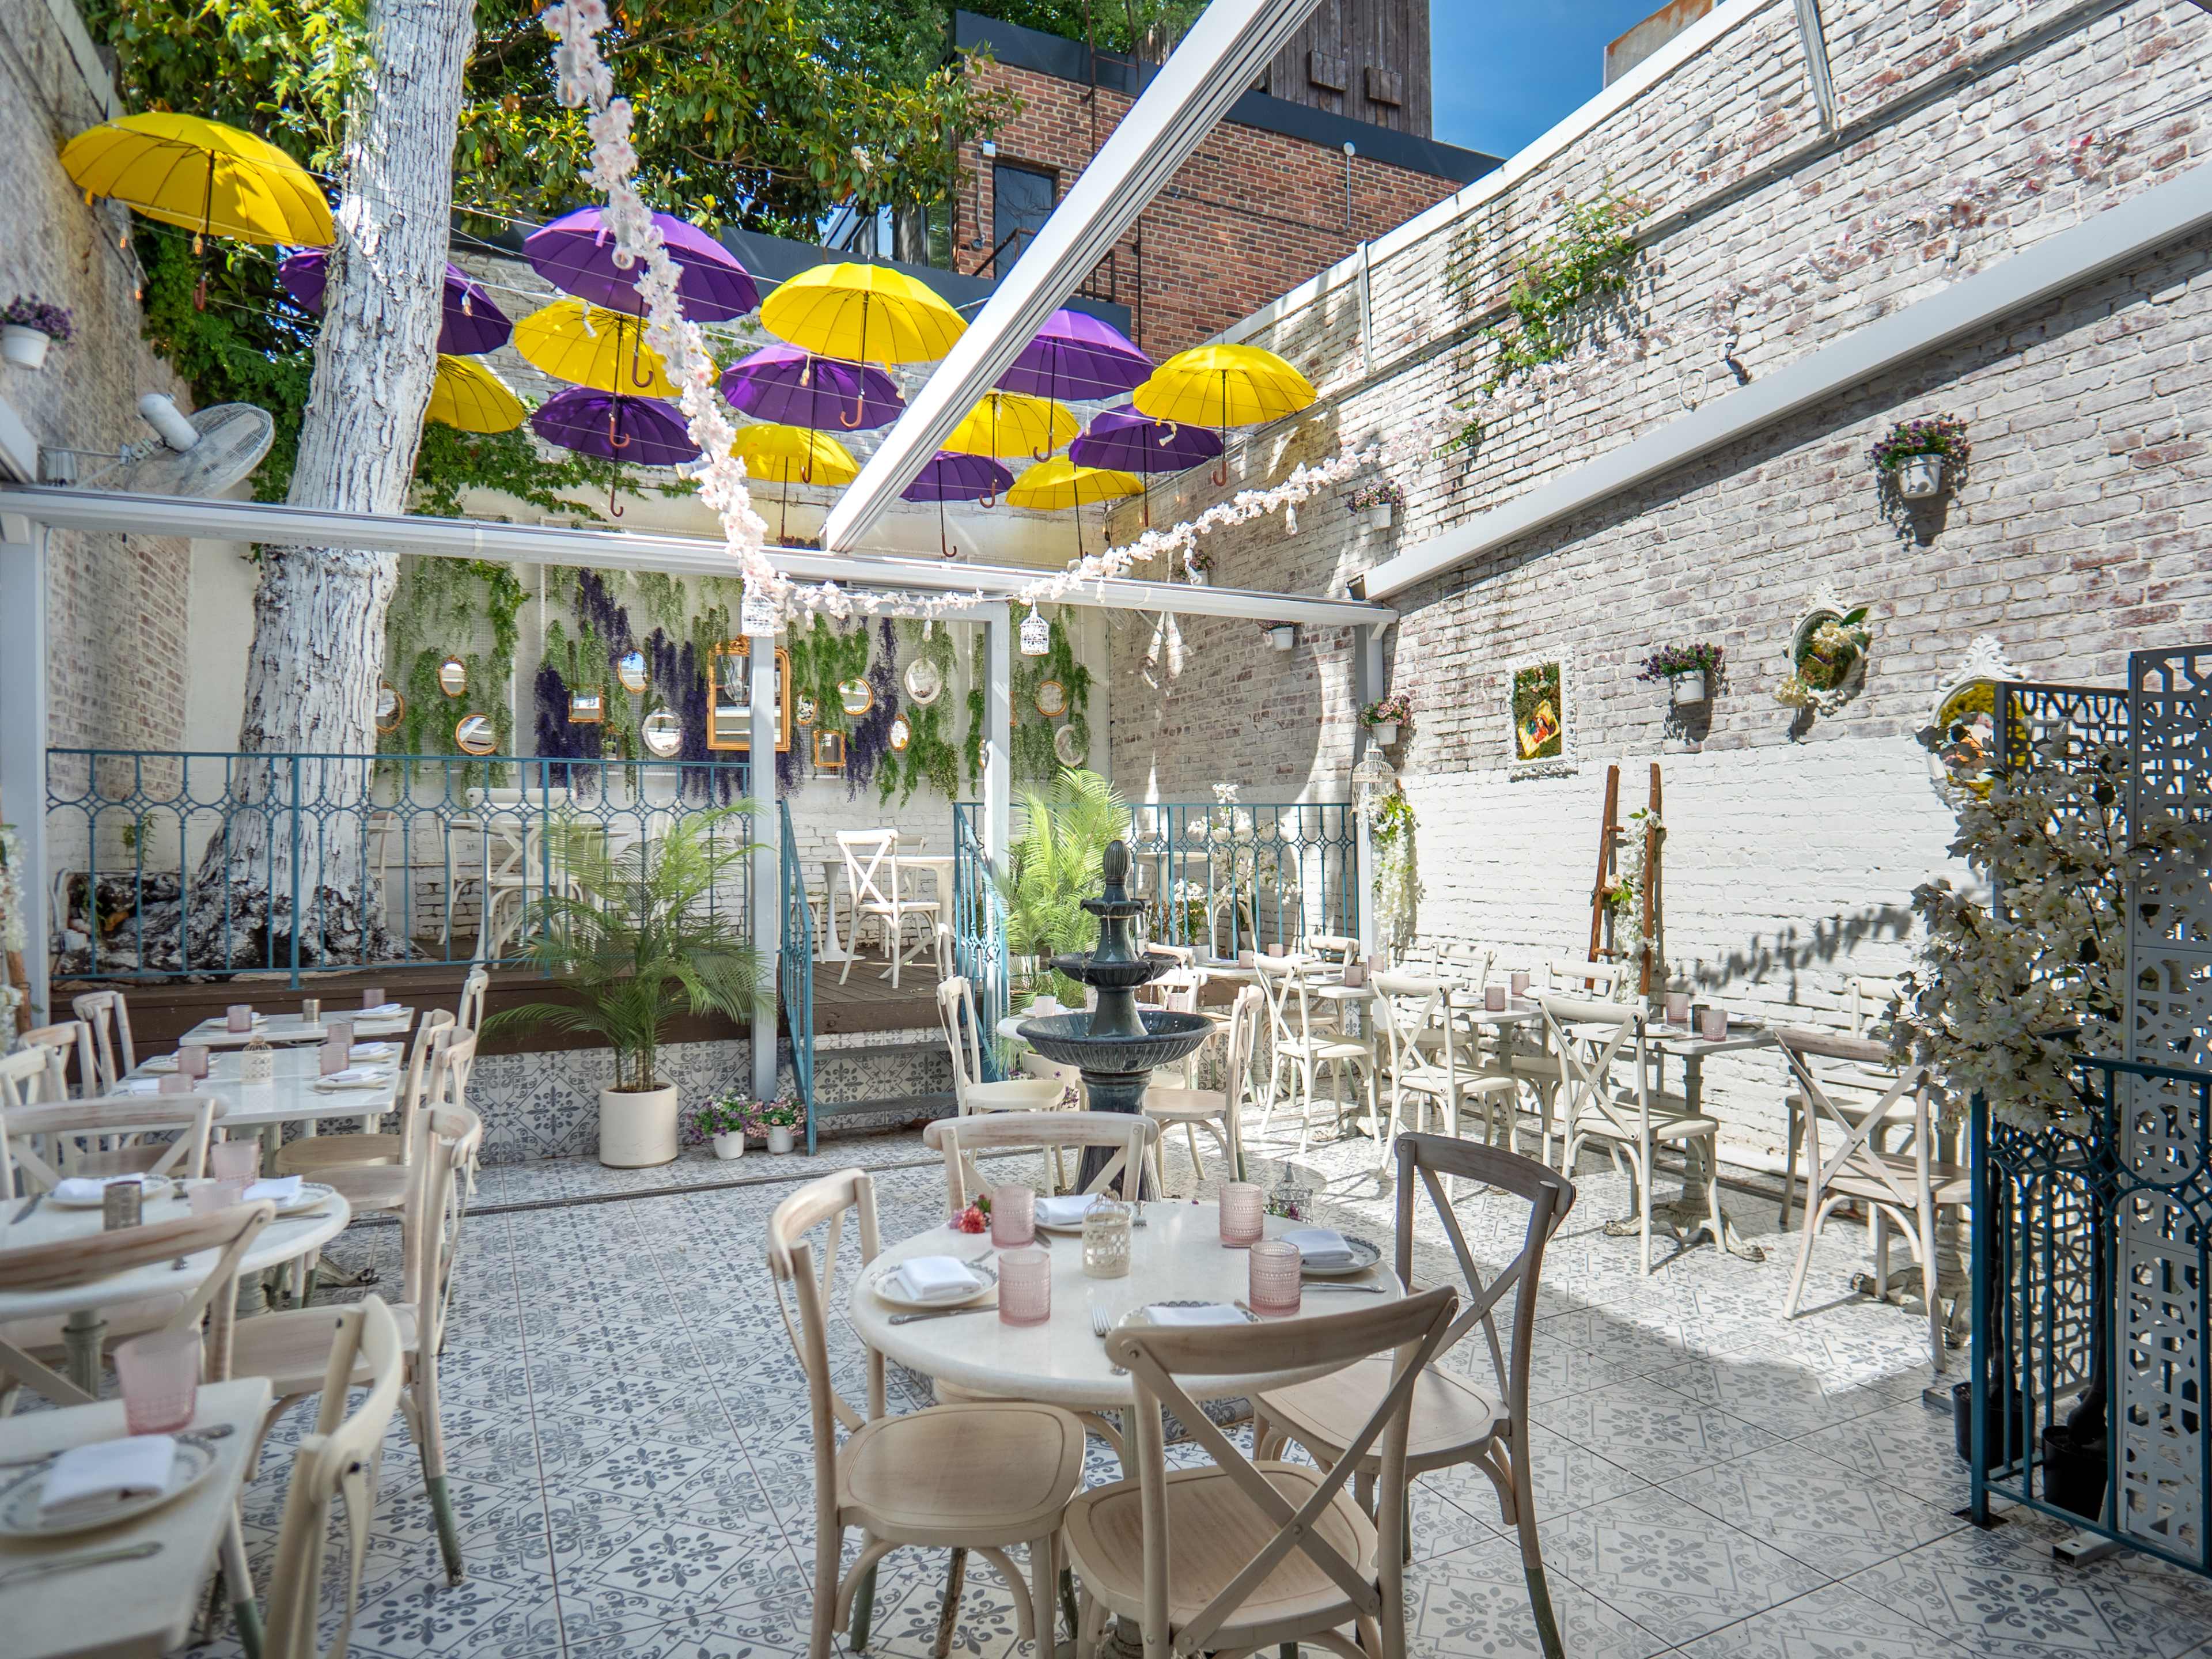 outdoor courtyard with hanging umbrellas and string lights above